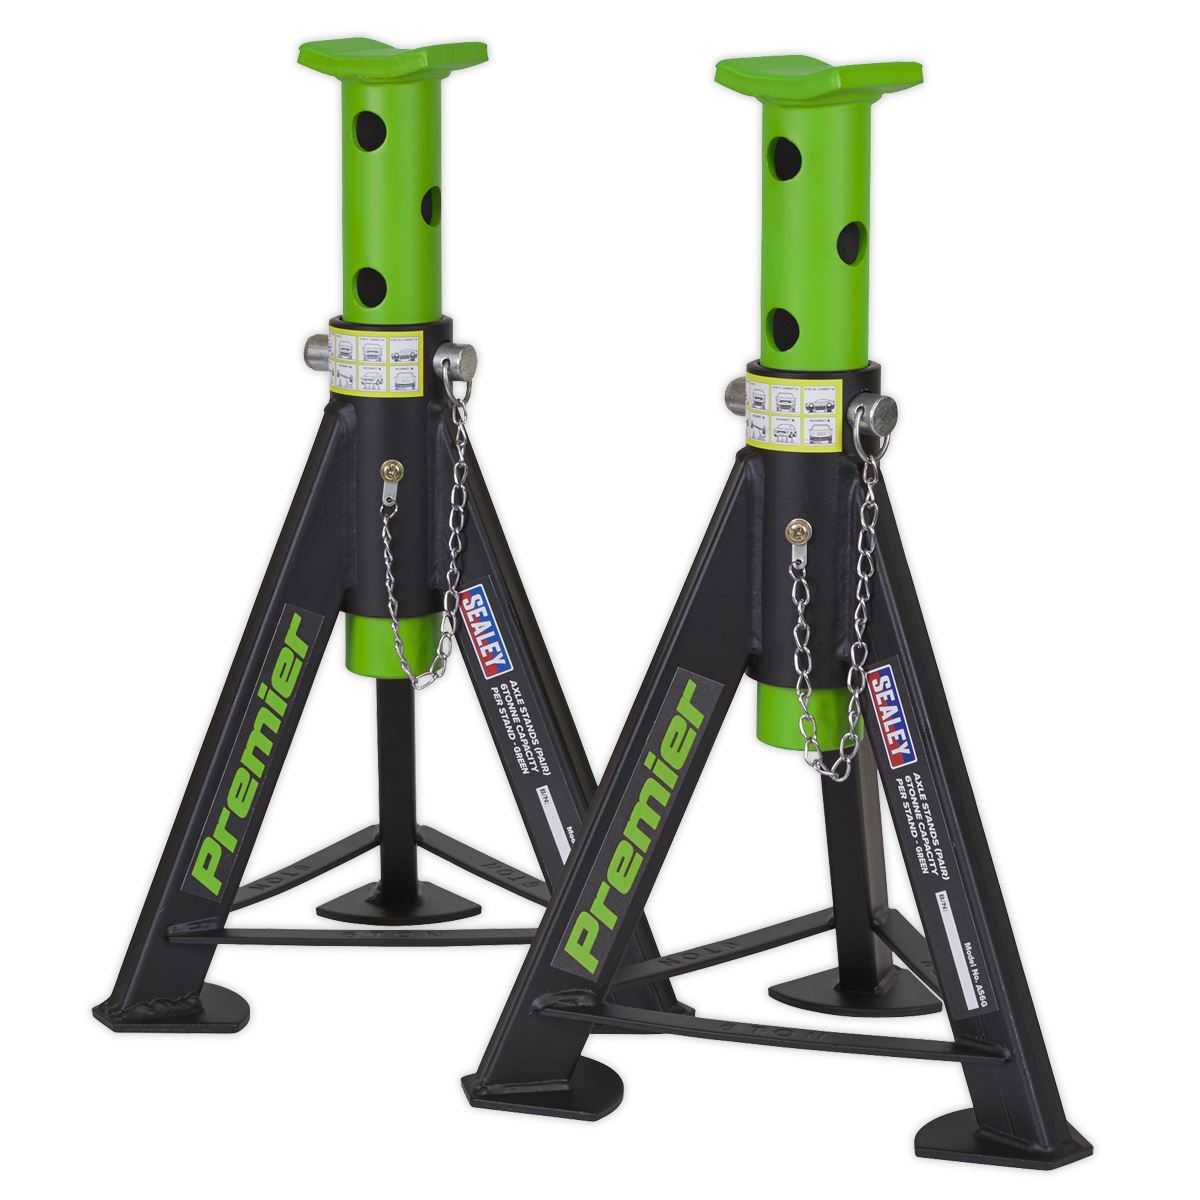 Sealey Premier Premier Axle Stands (Pair) 6 Tonne Capacity per Stand - Green